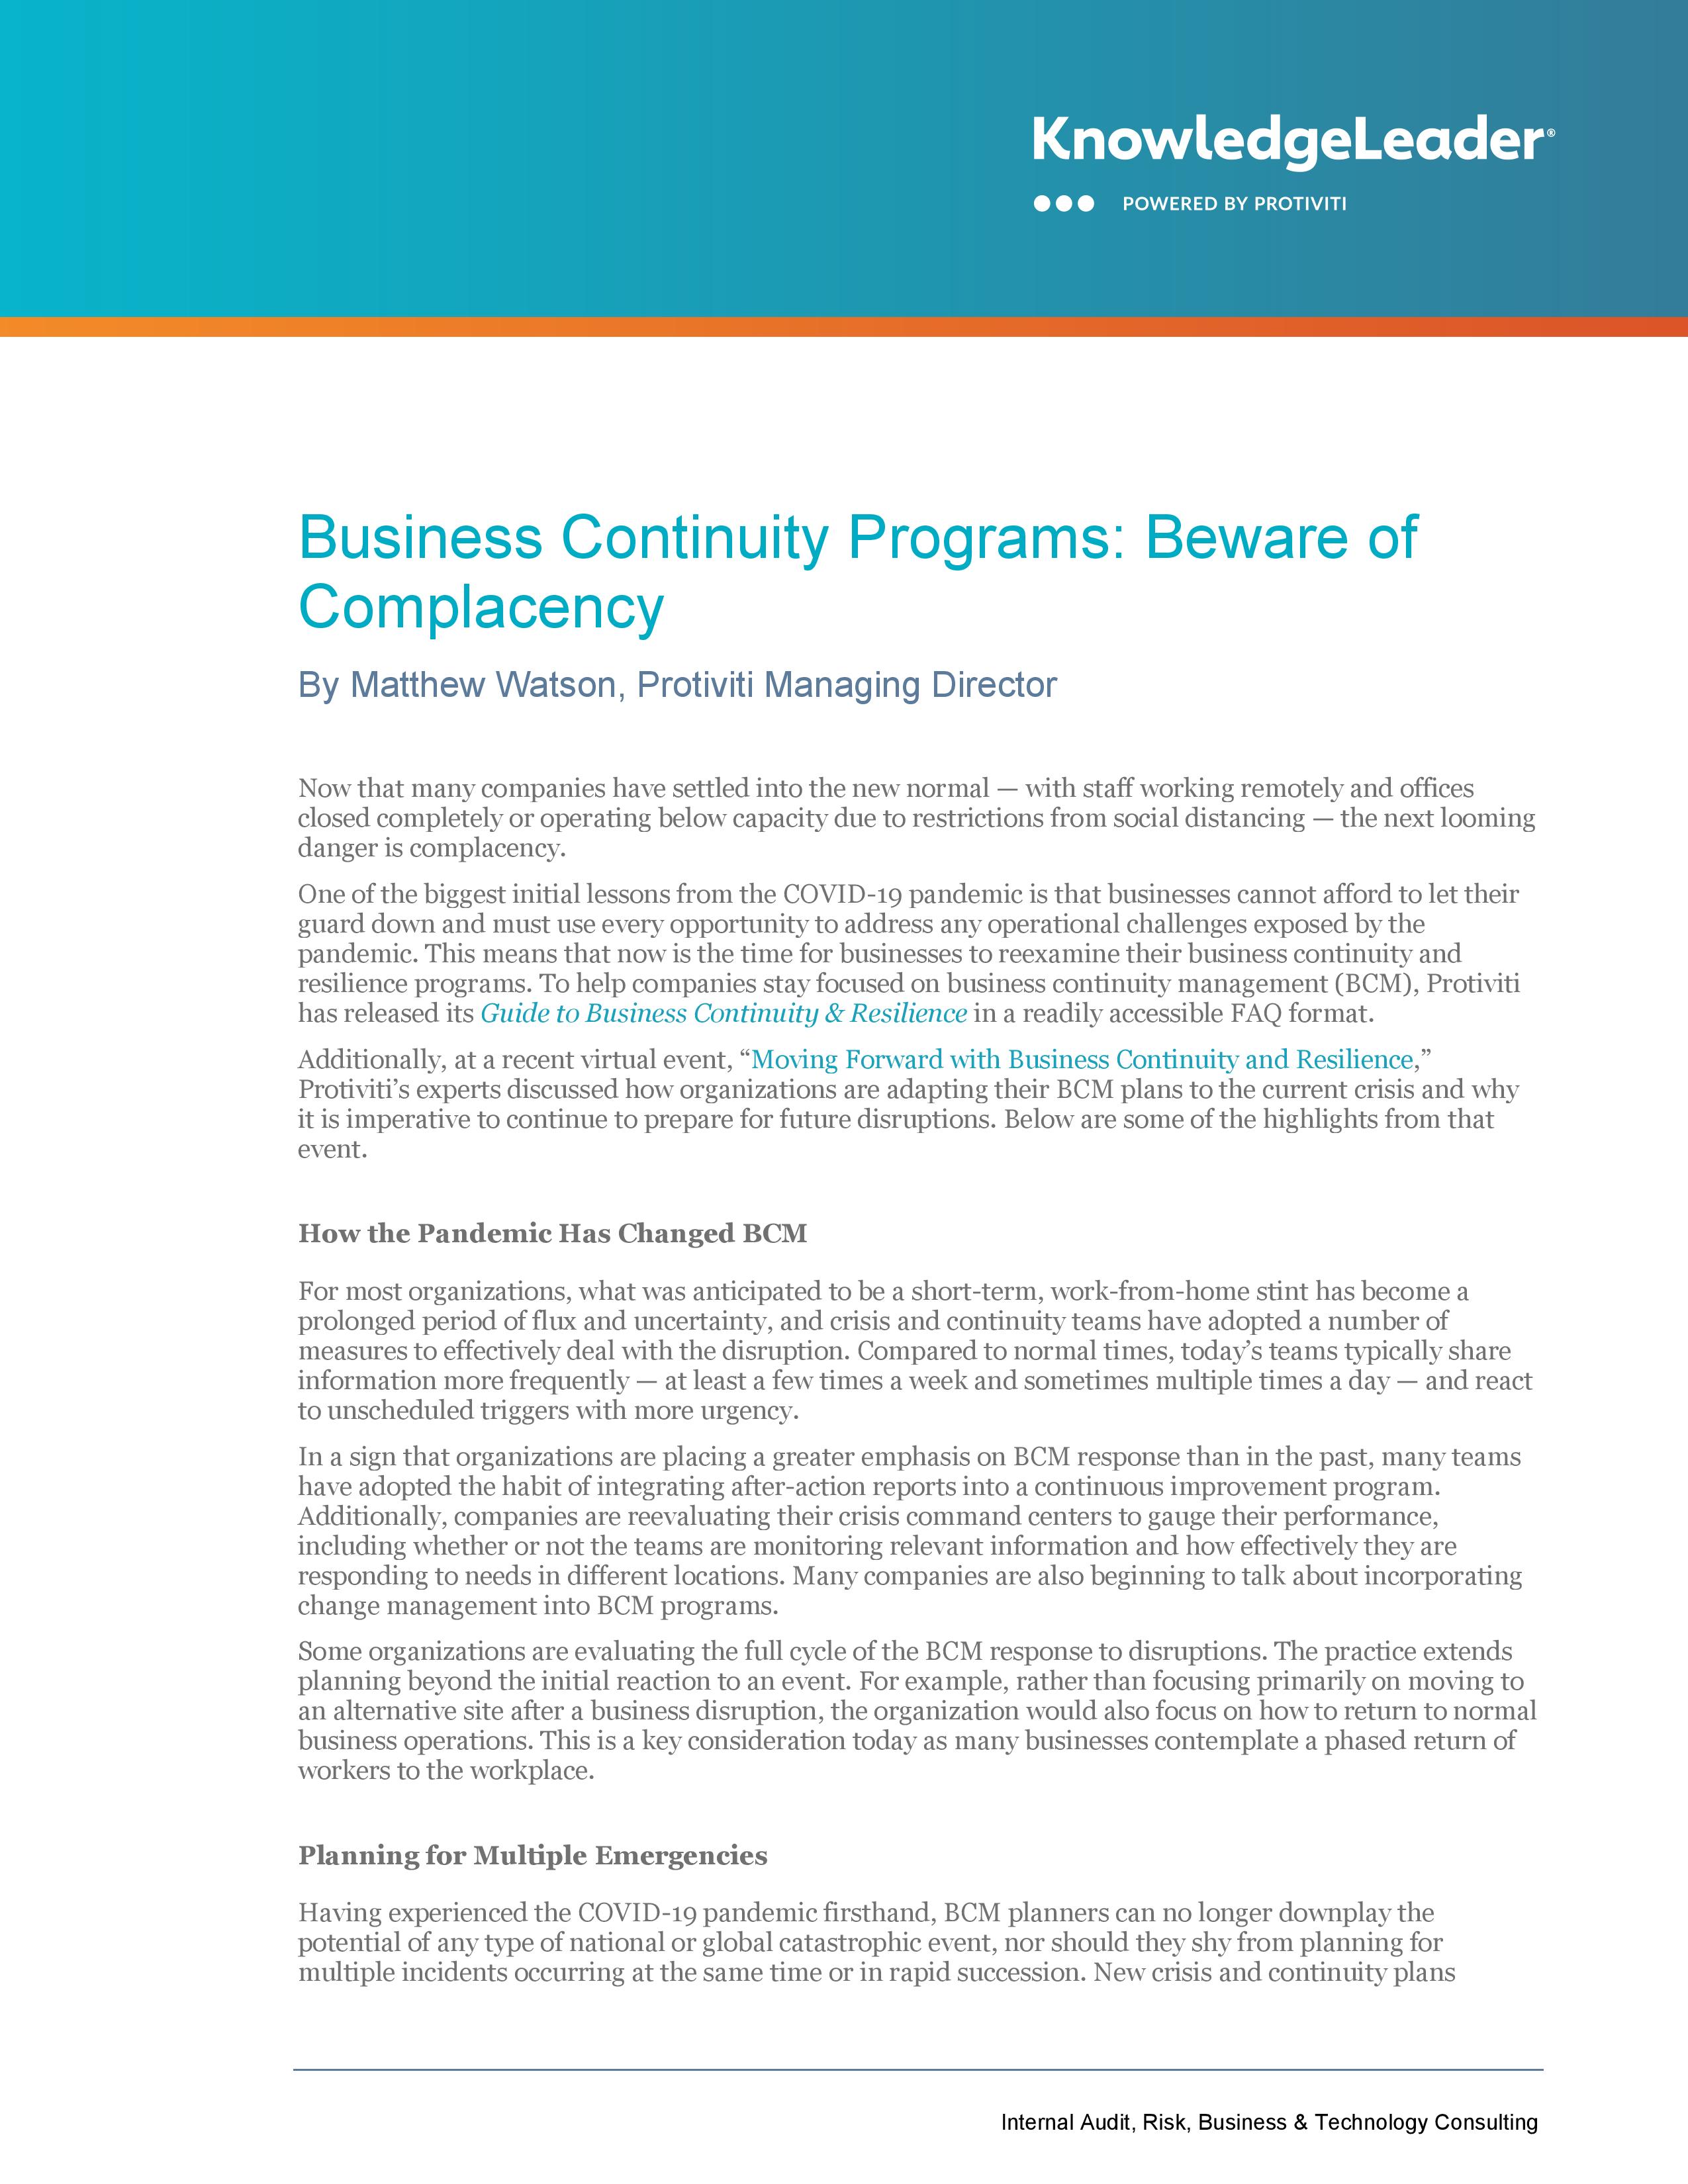 Screenshot of the first page of Business Continuity Programs Beware of Complacency